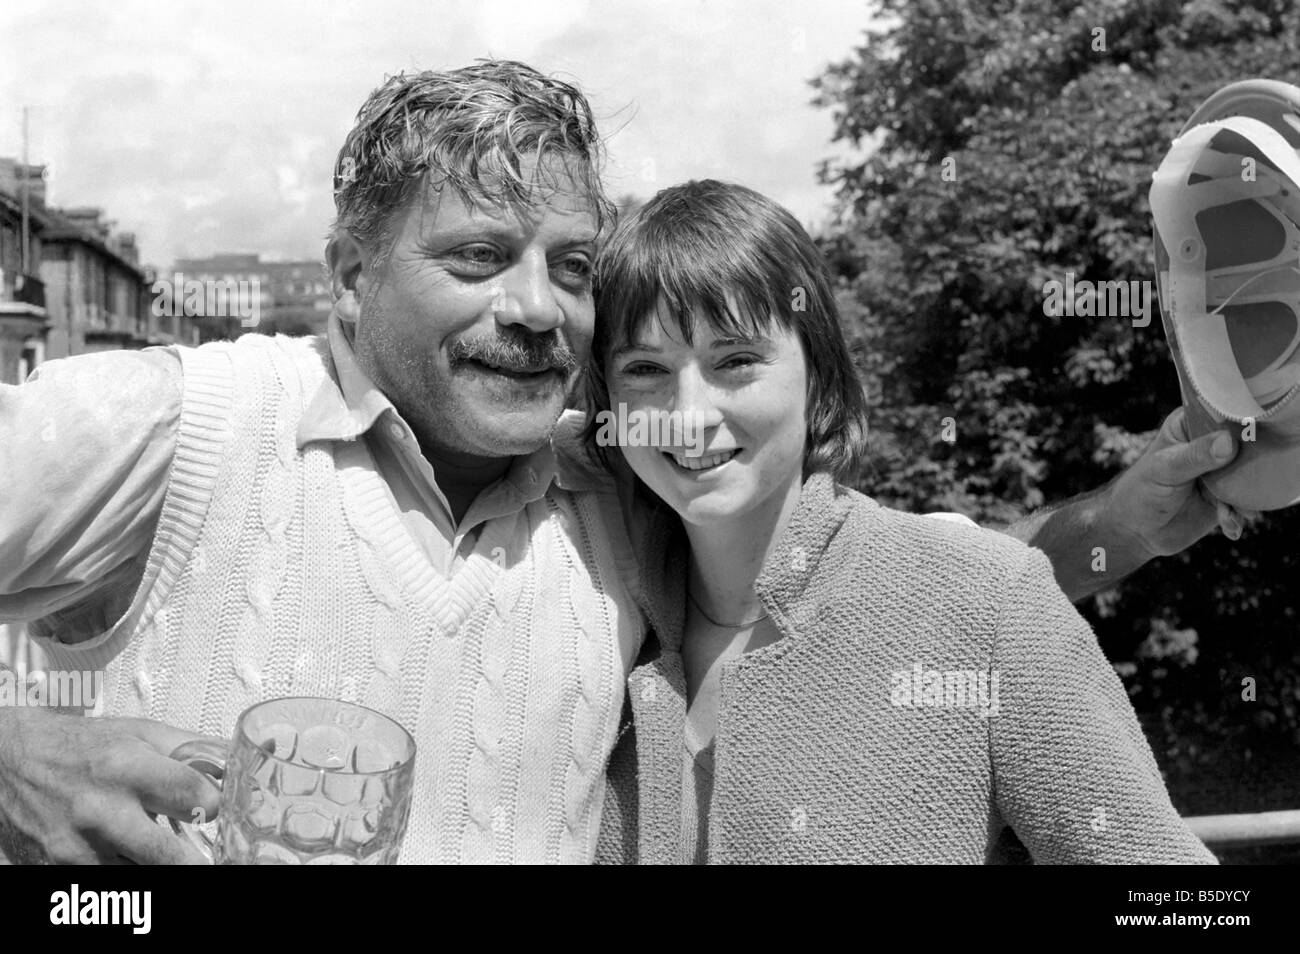 Entertainment. Film Actor: Actor Oliver Reed, today (Friday) ±tops out¯ a property project to be carried out by his company Ace Stock Photo